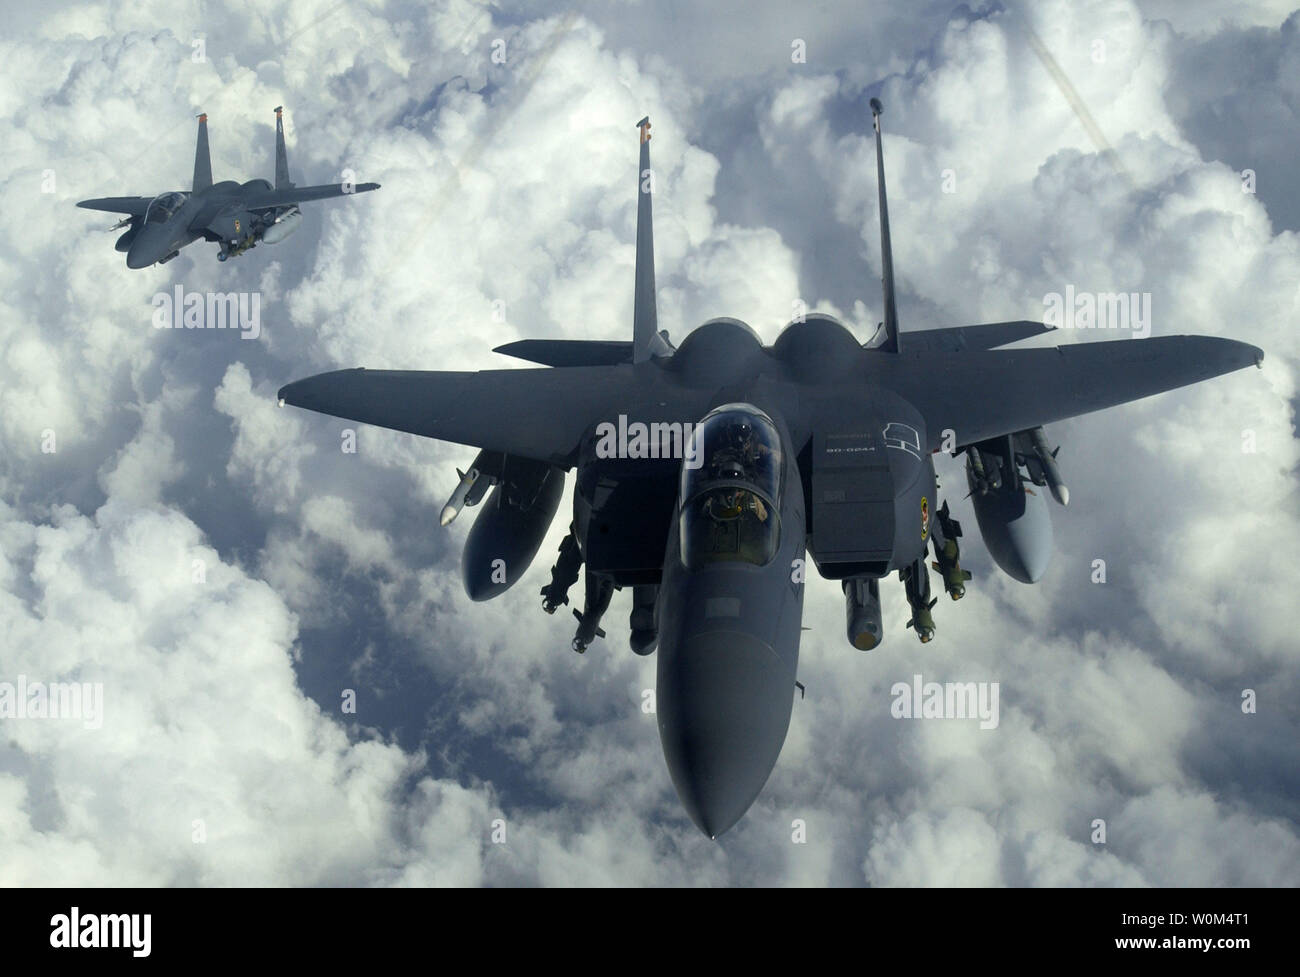 A U.S. Air Force F-15E Strike Eagles from Mountain Home Air Force Base, Idaho, soars over Iraq on December 18, 2003 in support of the Iraqi conflict.  The F-15E Strike Eagle is a dual-role fighter designed to perform air-to-air and air-to-ground missions.  An array of avionics and electronics systems gives the F-15E the capability to fight at low altitude, day or night, and in inclement weather and perform its primary function as an air-to-ground attack aircraft.  (UPI Photo/Suzanne Jenkins/Air Force) Stock Photo